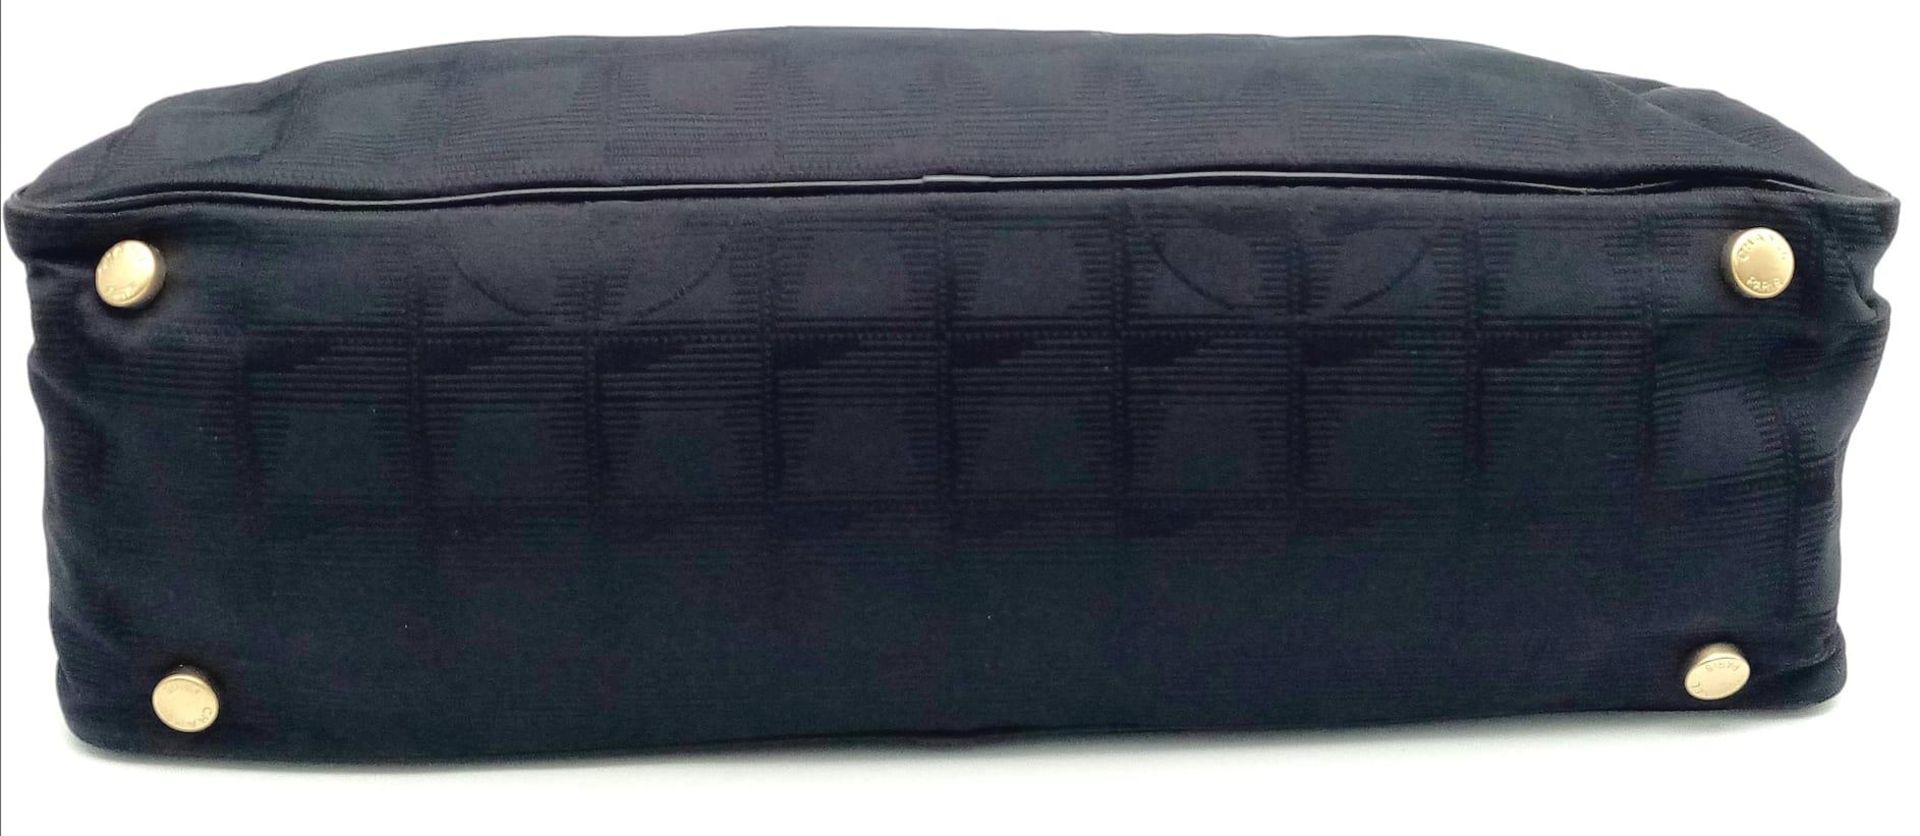 A Chanel Black Travel Line Bag. Canvas exterior with leather straps, four protective base studs - Image 5 of 14